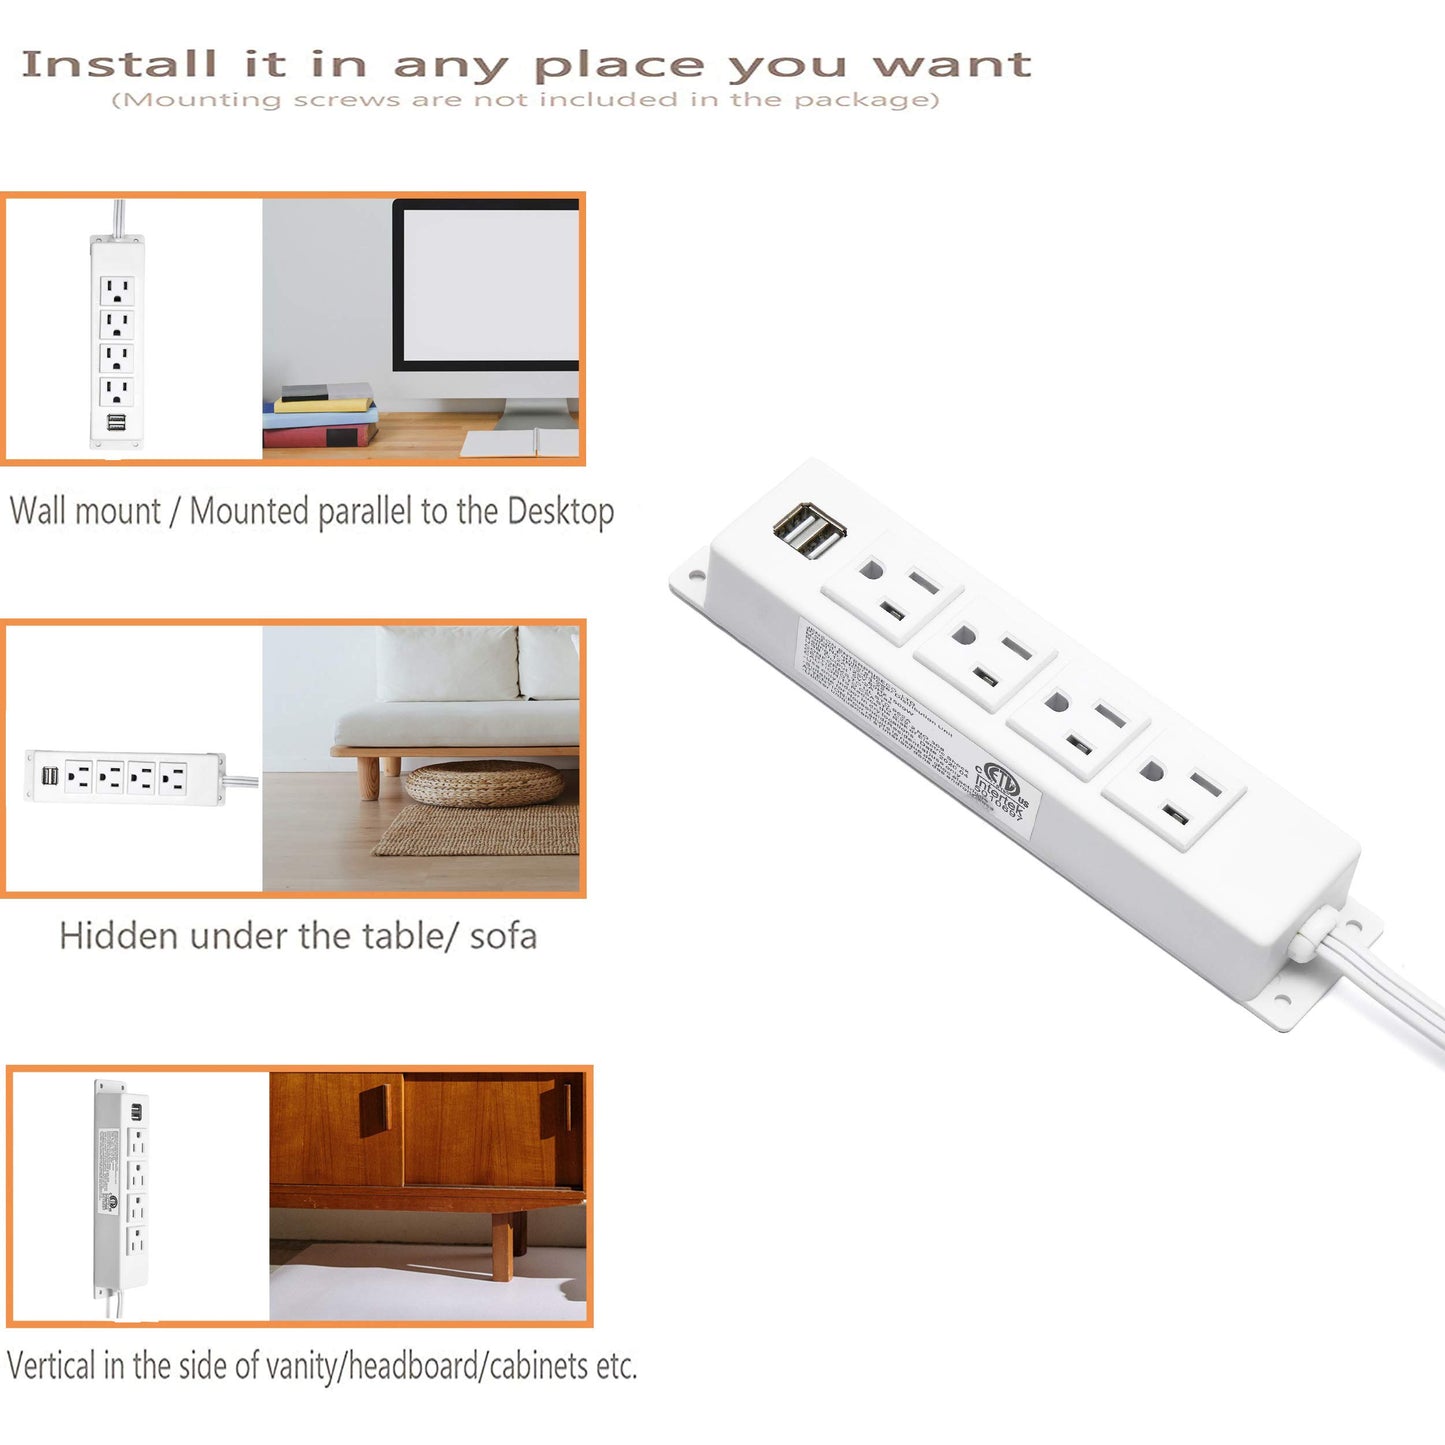 Wall Mount Power Strip with USB, 4 AC Outlet and 2 USB Ports